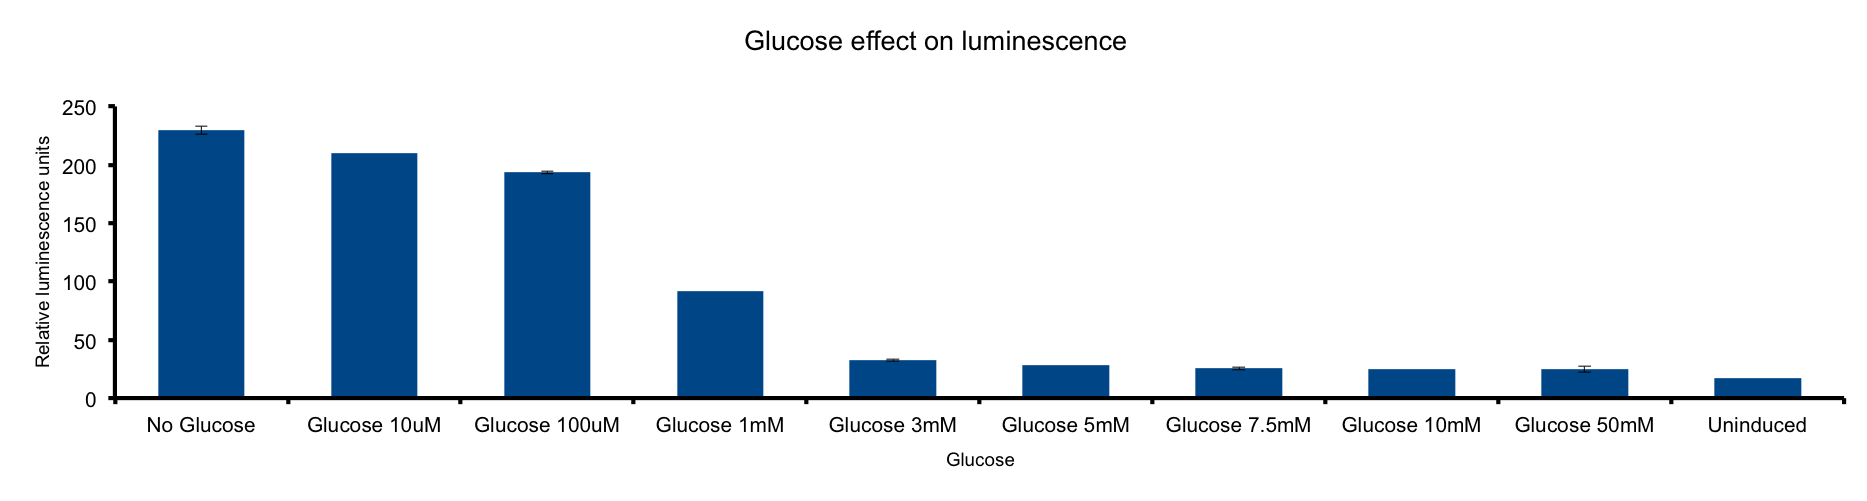 UC Chile-Glucose effect on luminescence .png